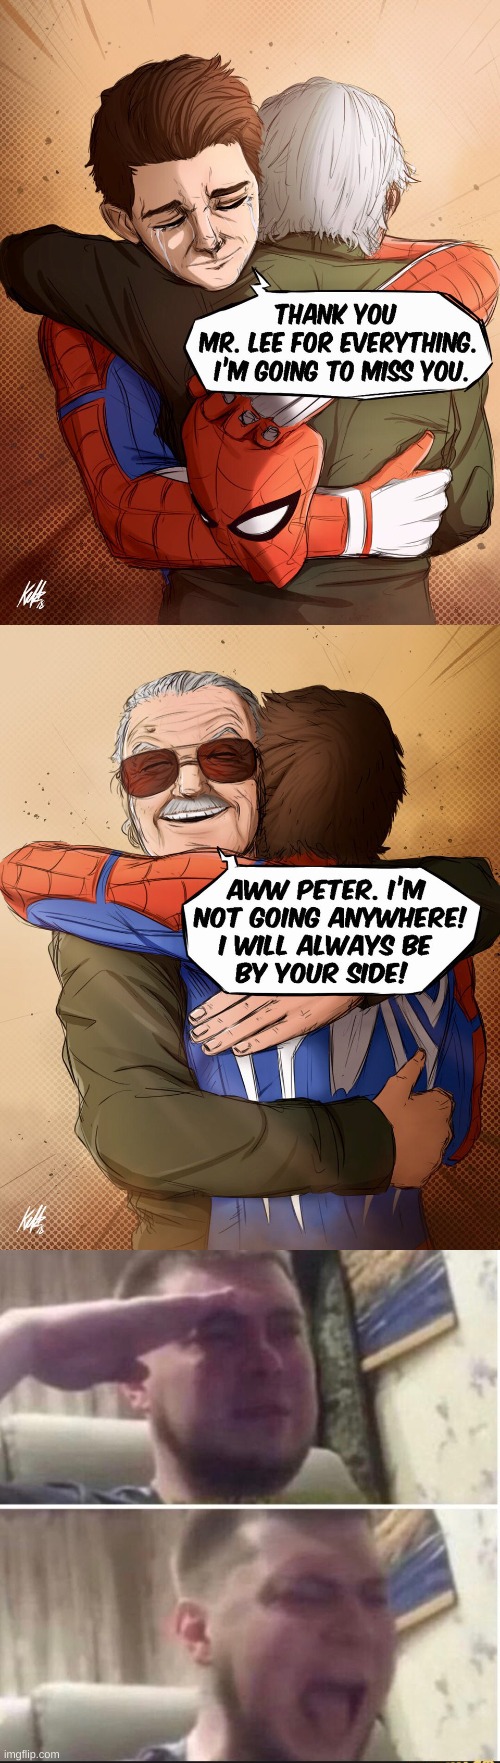 RIP Stan Lee | image tagged in crying salute,stan lee,spiderman | made w/ Imgflip meme maker